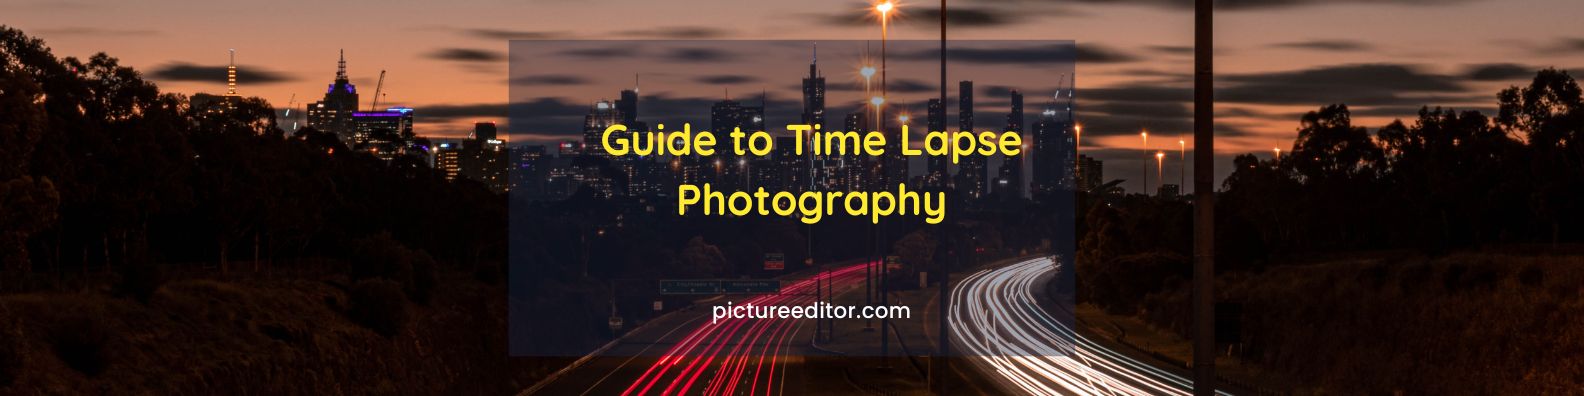 Guide to Time Lapse Photography